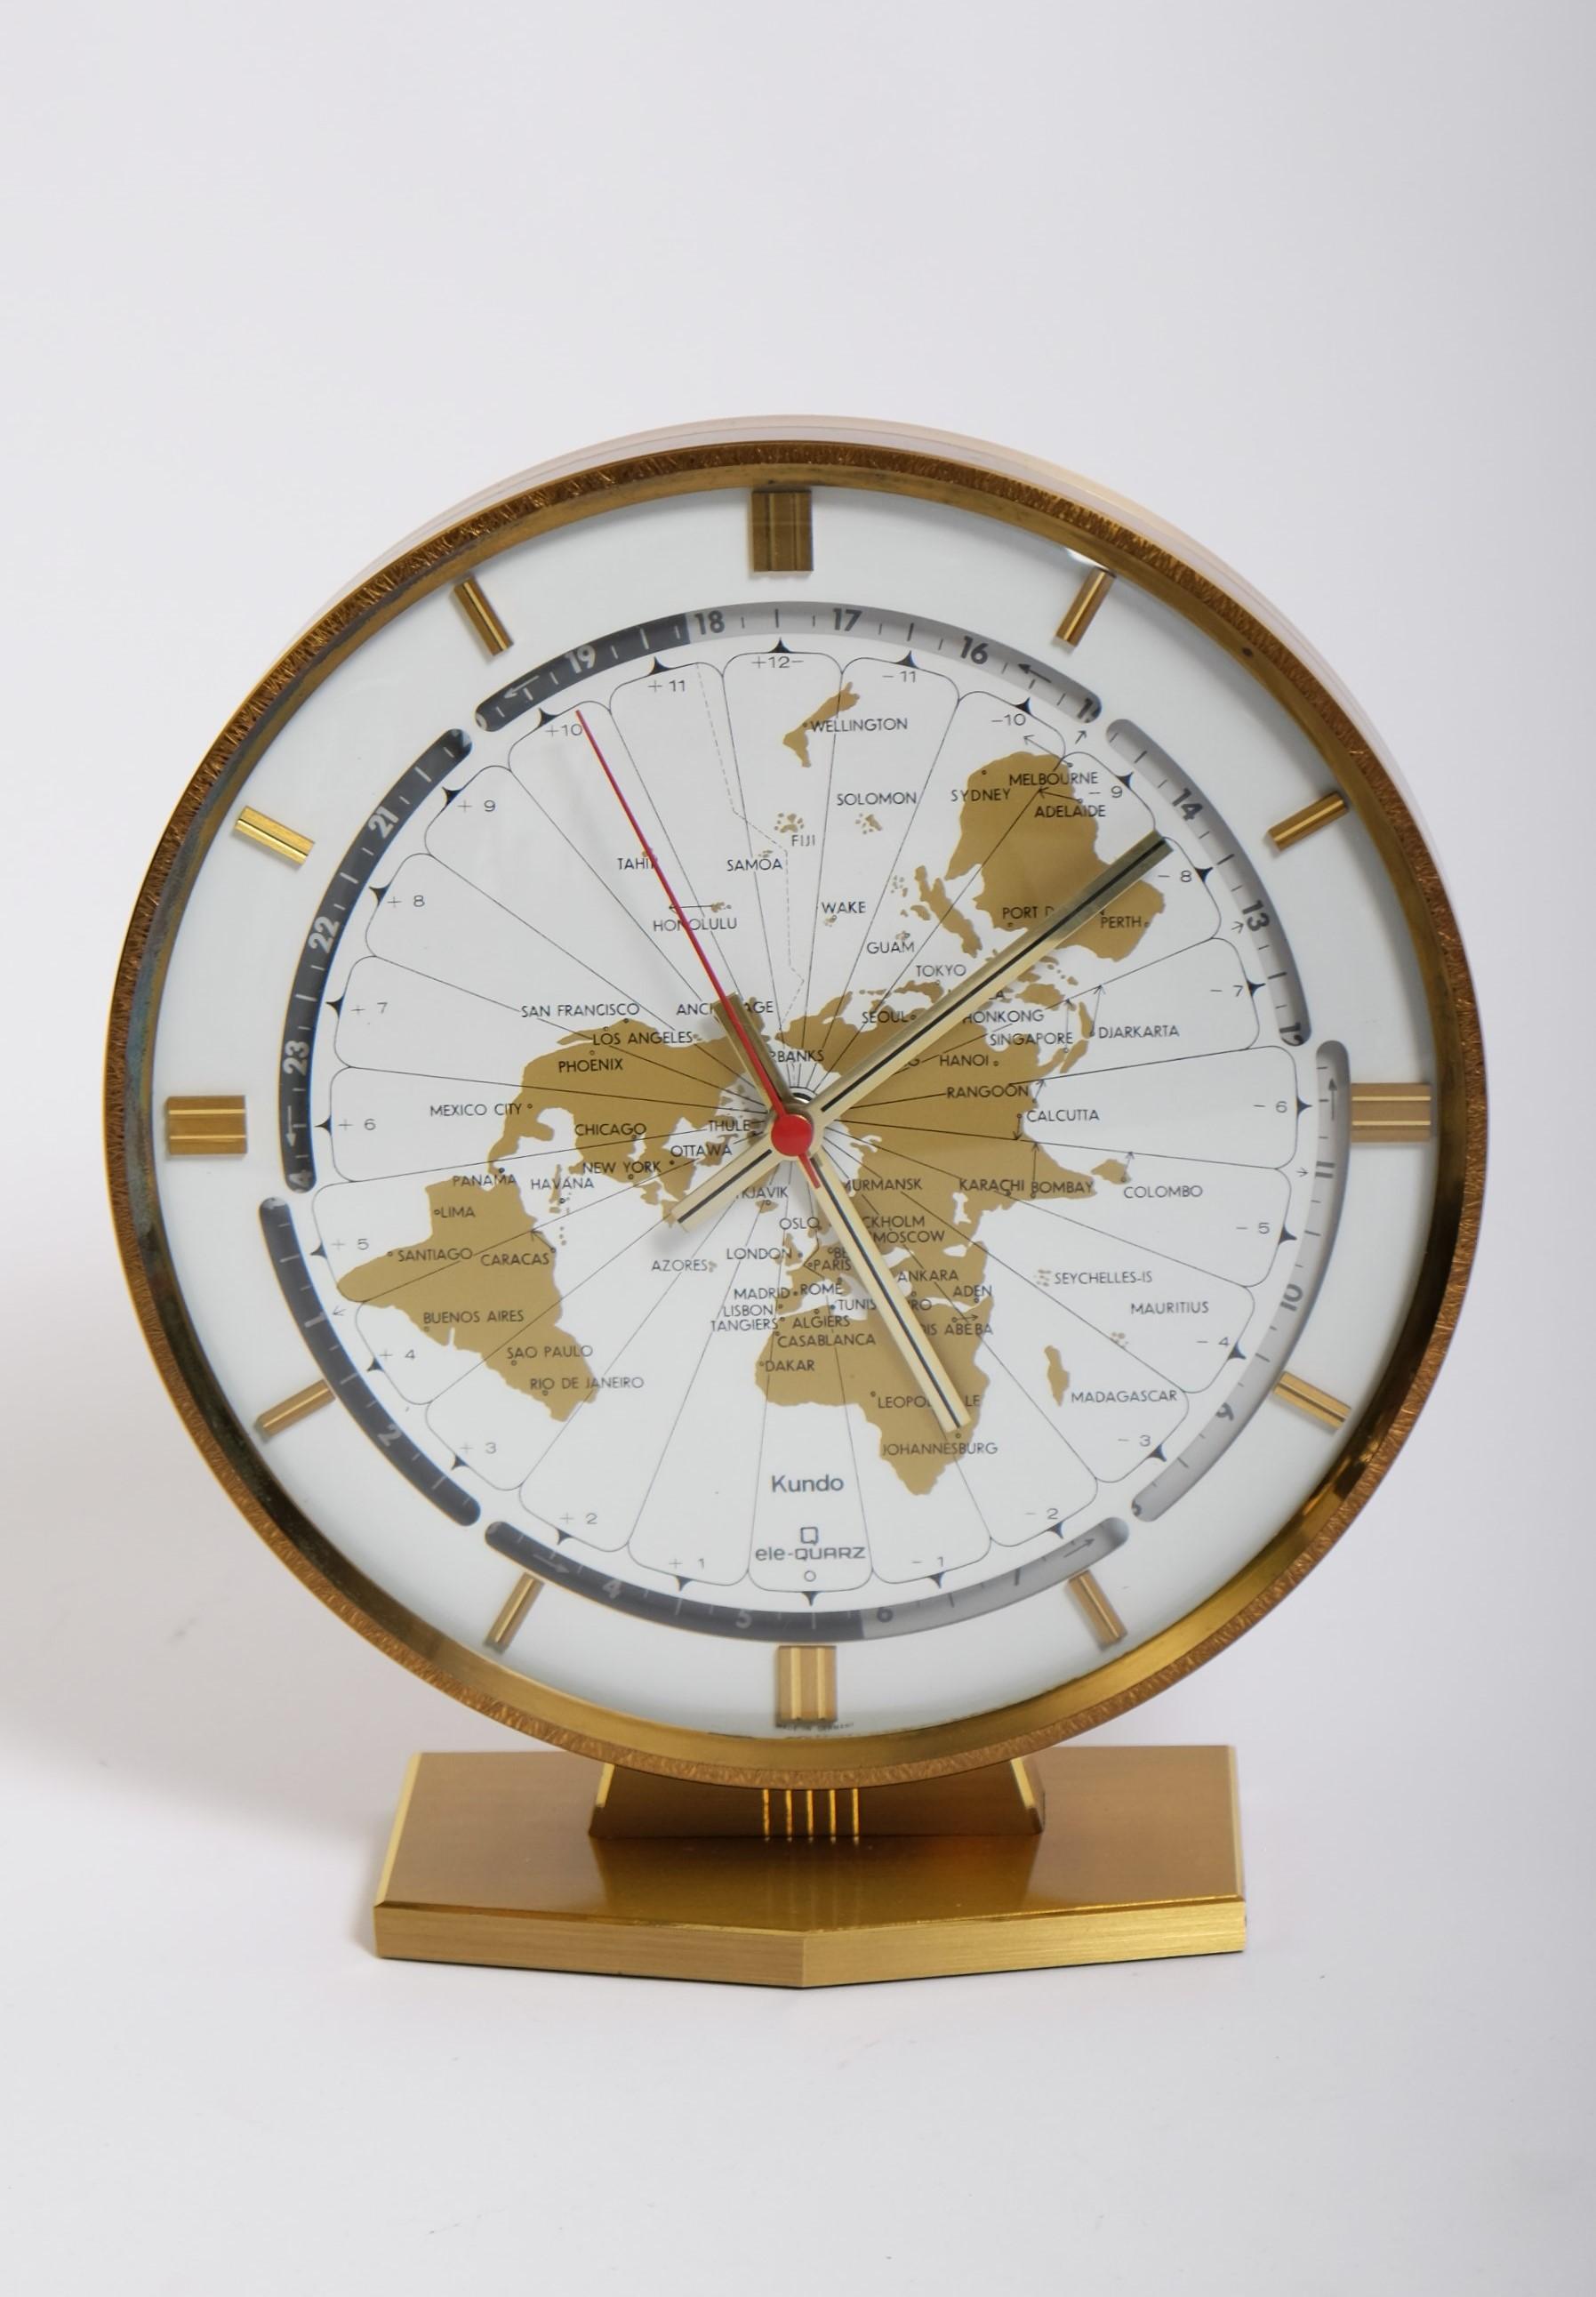 Large modernist brass table world time clock by Kundo / Kieninger & Obergfell, West Germany circa 1970s.

Beautiful clock with a large 9-inch round dial in white with a gold world map design and world time zones. The heavy case and base are made of